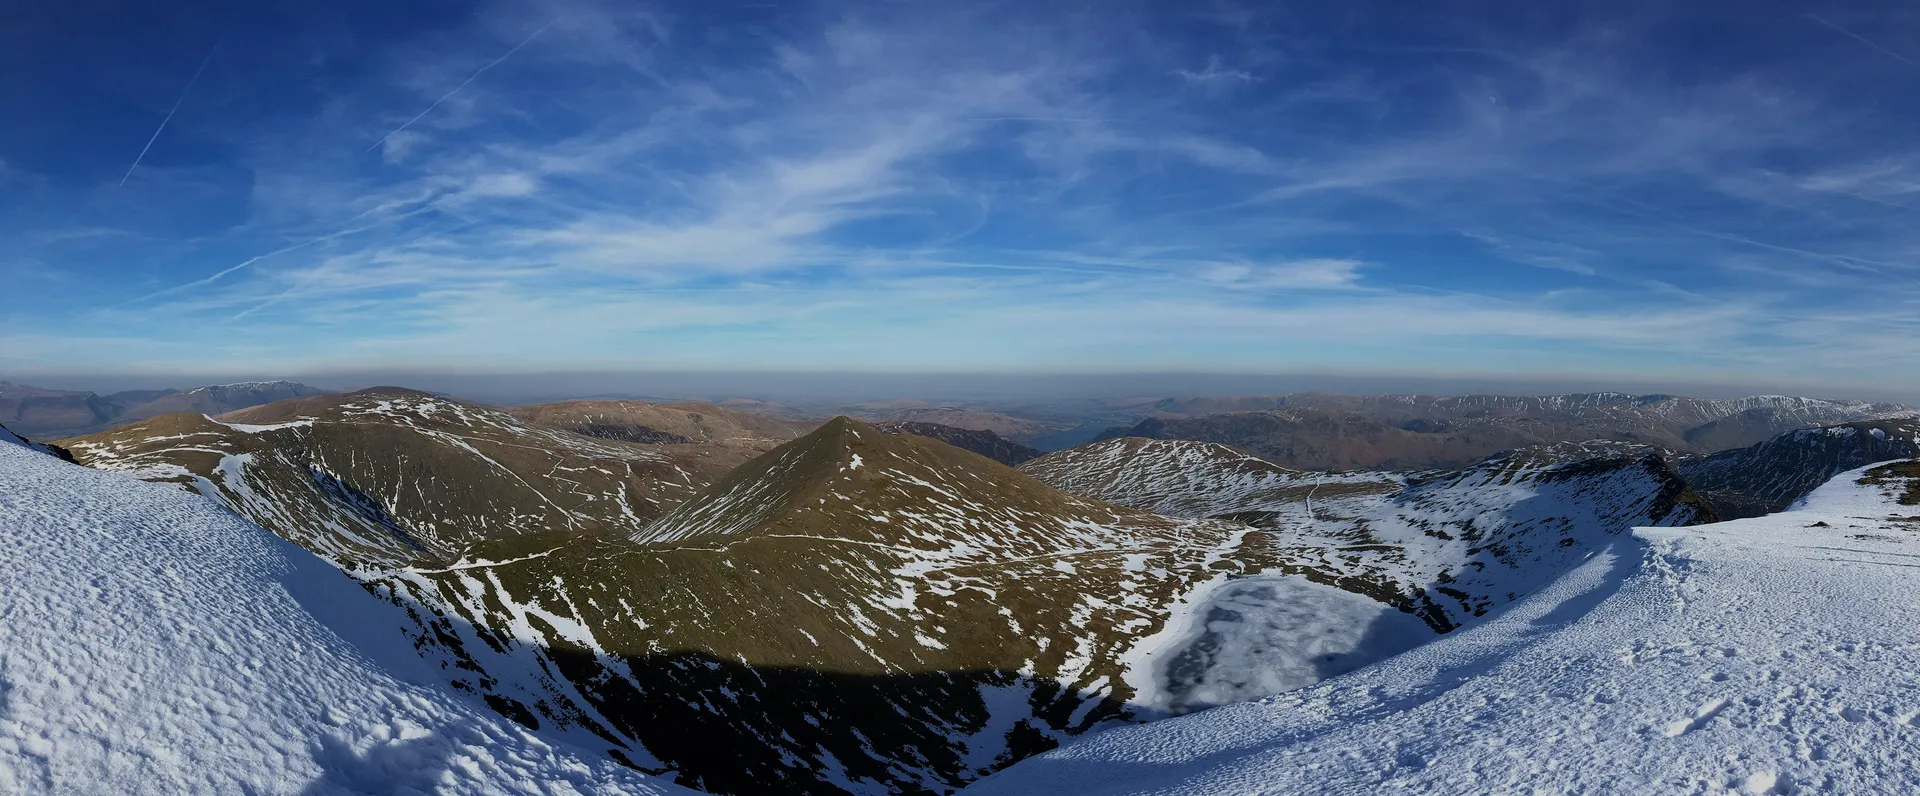 panoramic picture of a snow covered hills